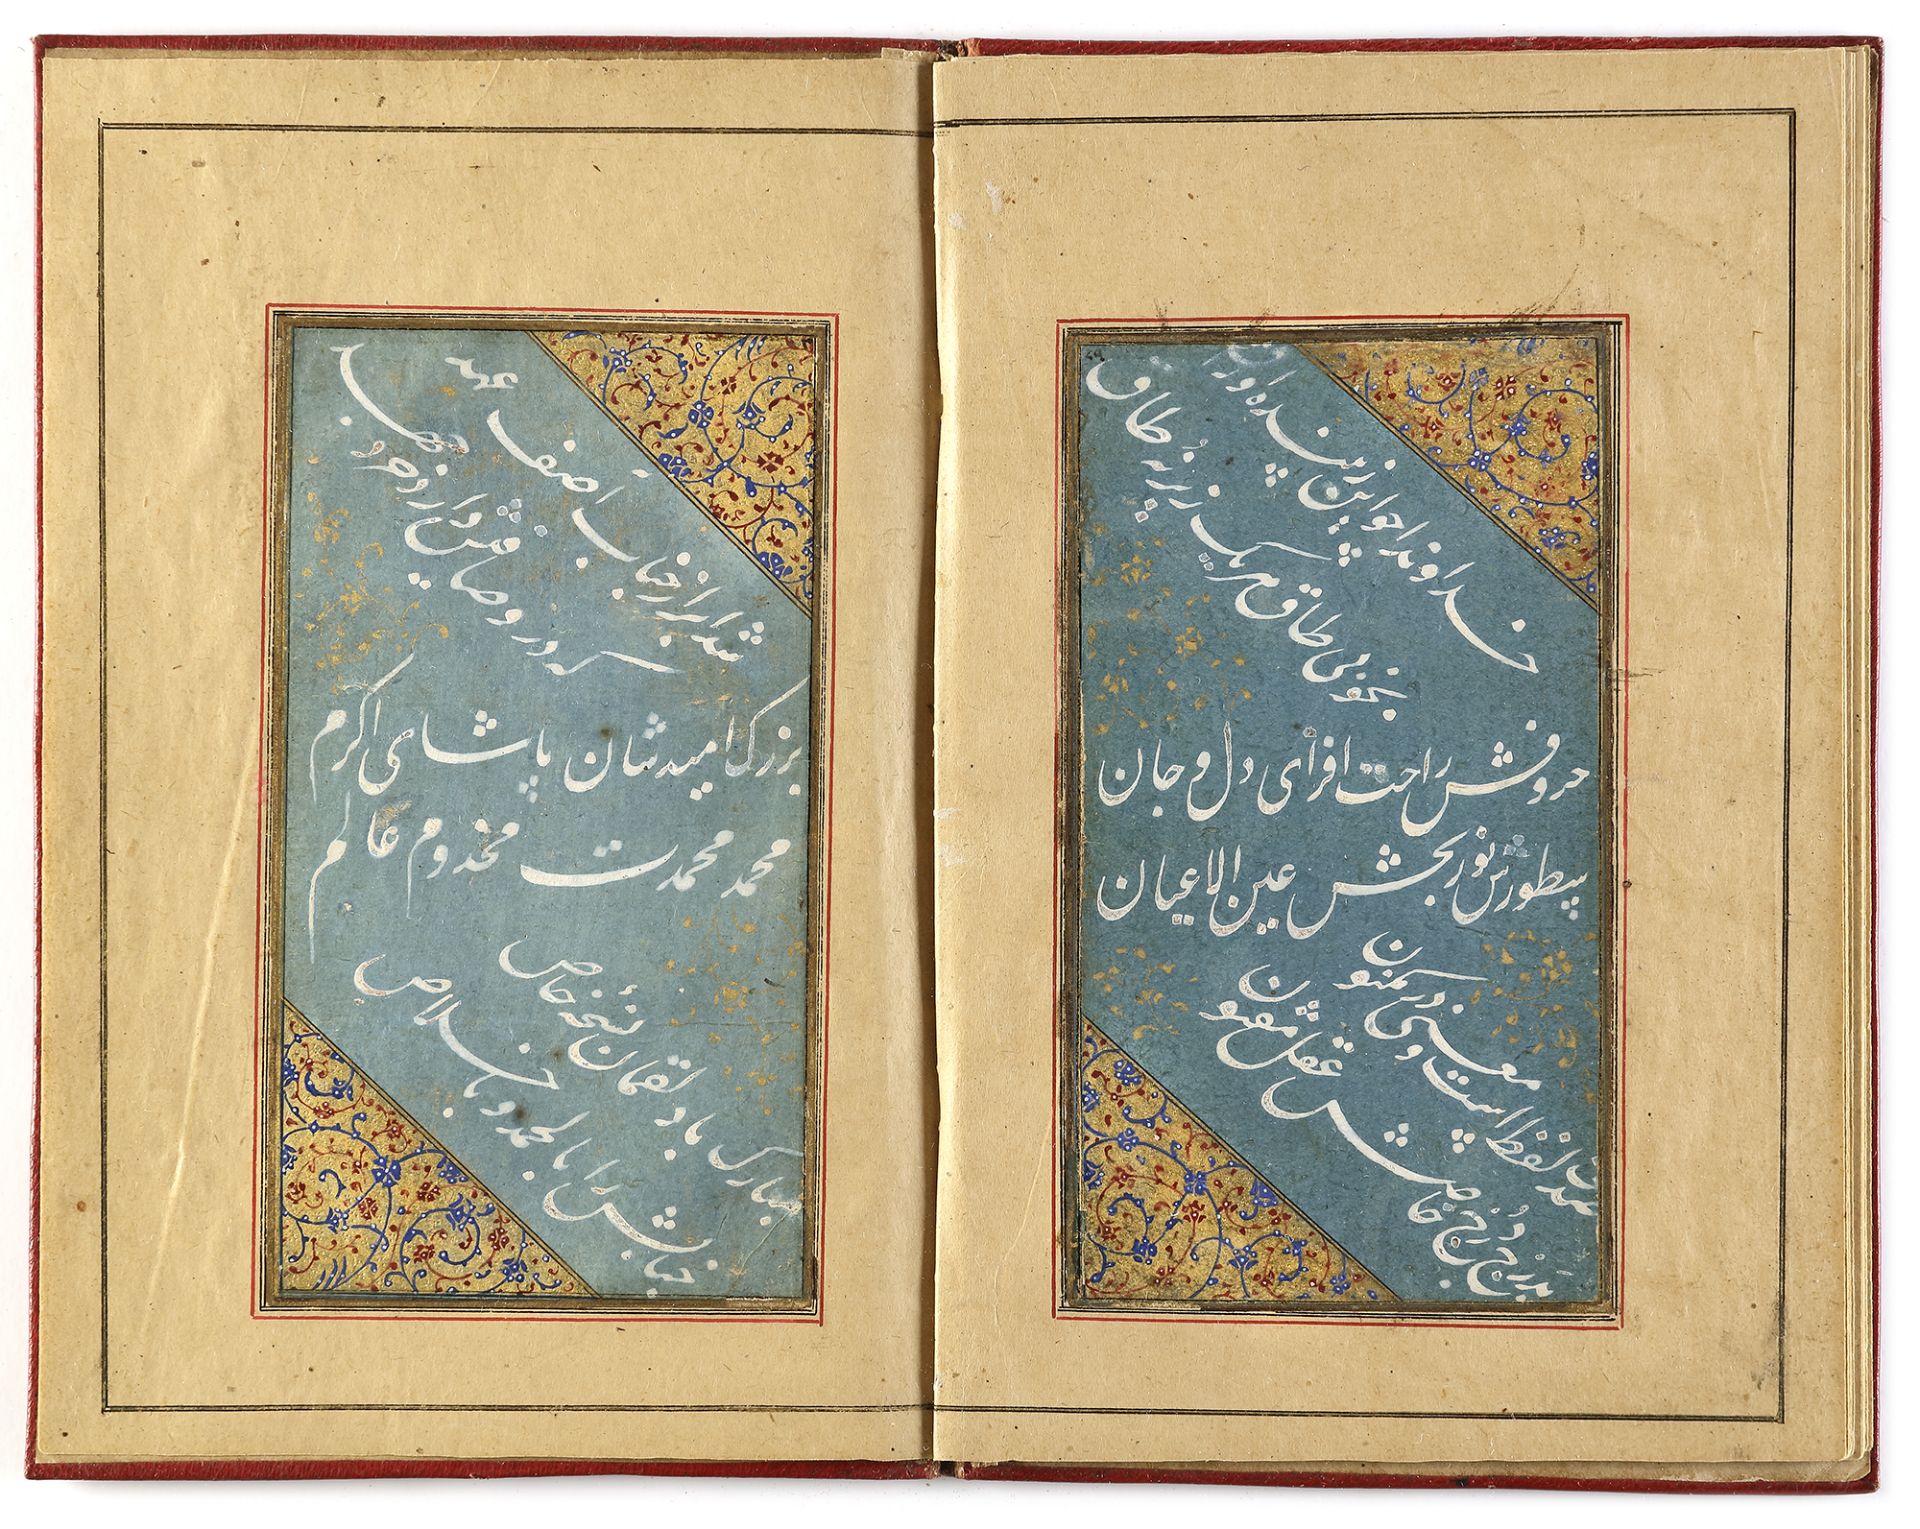 A MANUSCRIPT OF POETRY, SIGNED BY IKHTIYAR AL-MUNSHI, PERSIA, SAVAFID, DATED 975 AH/1567-68 AD - Image 12 of 18